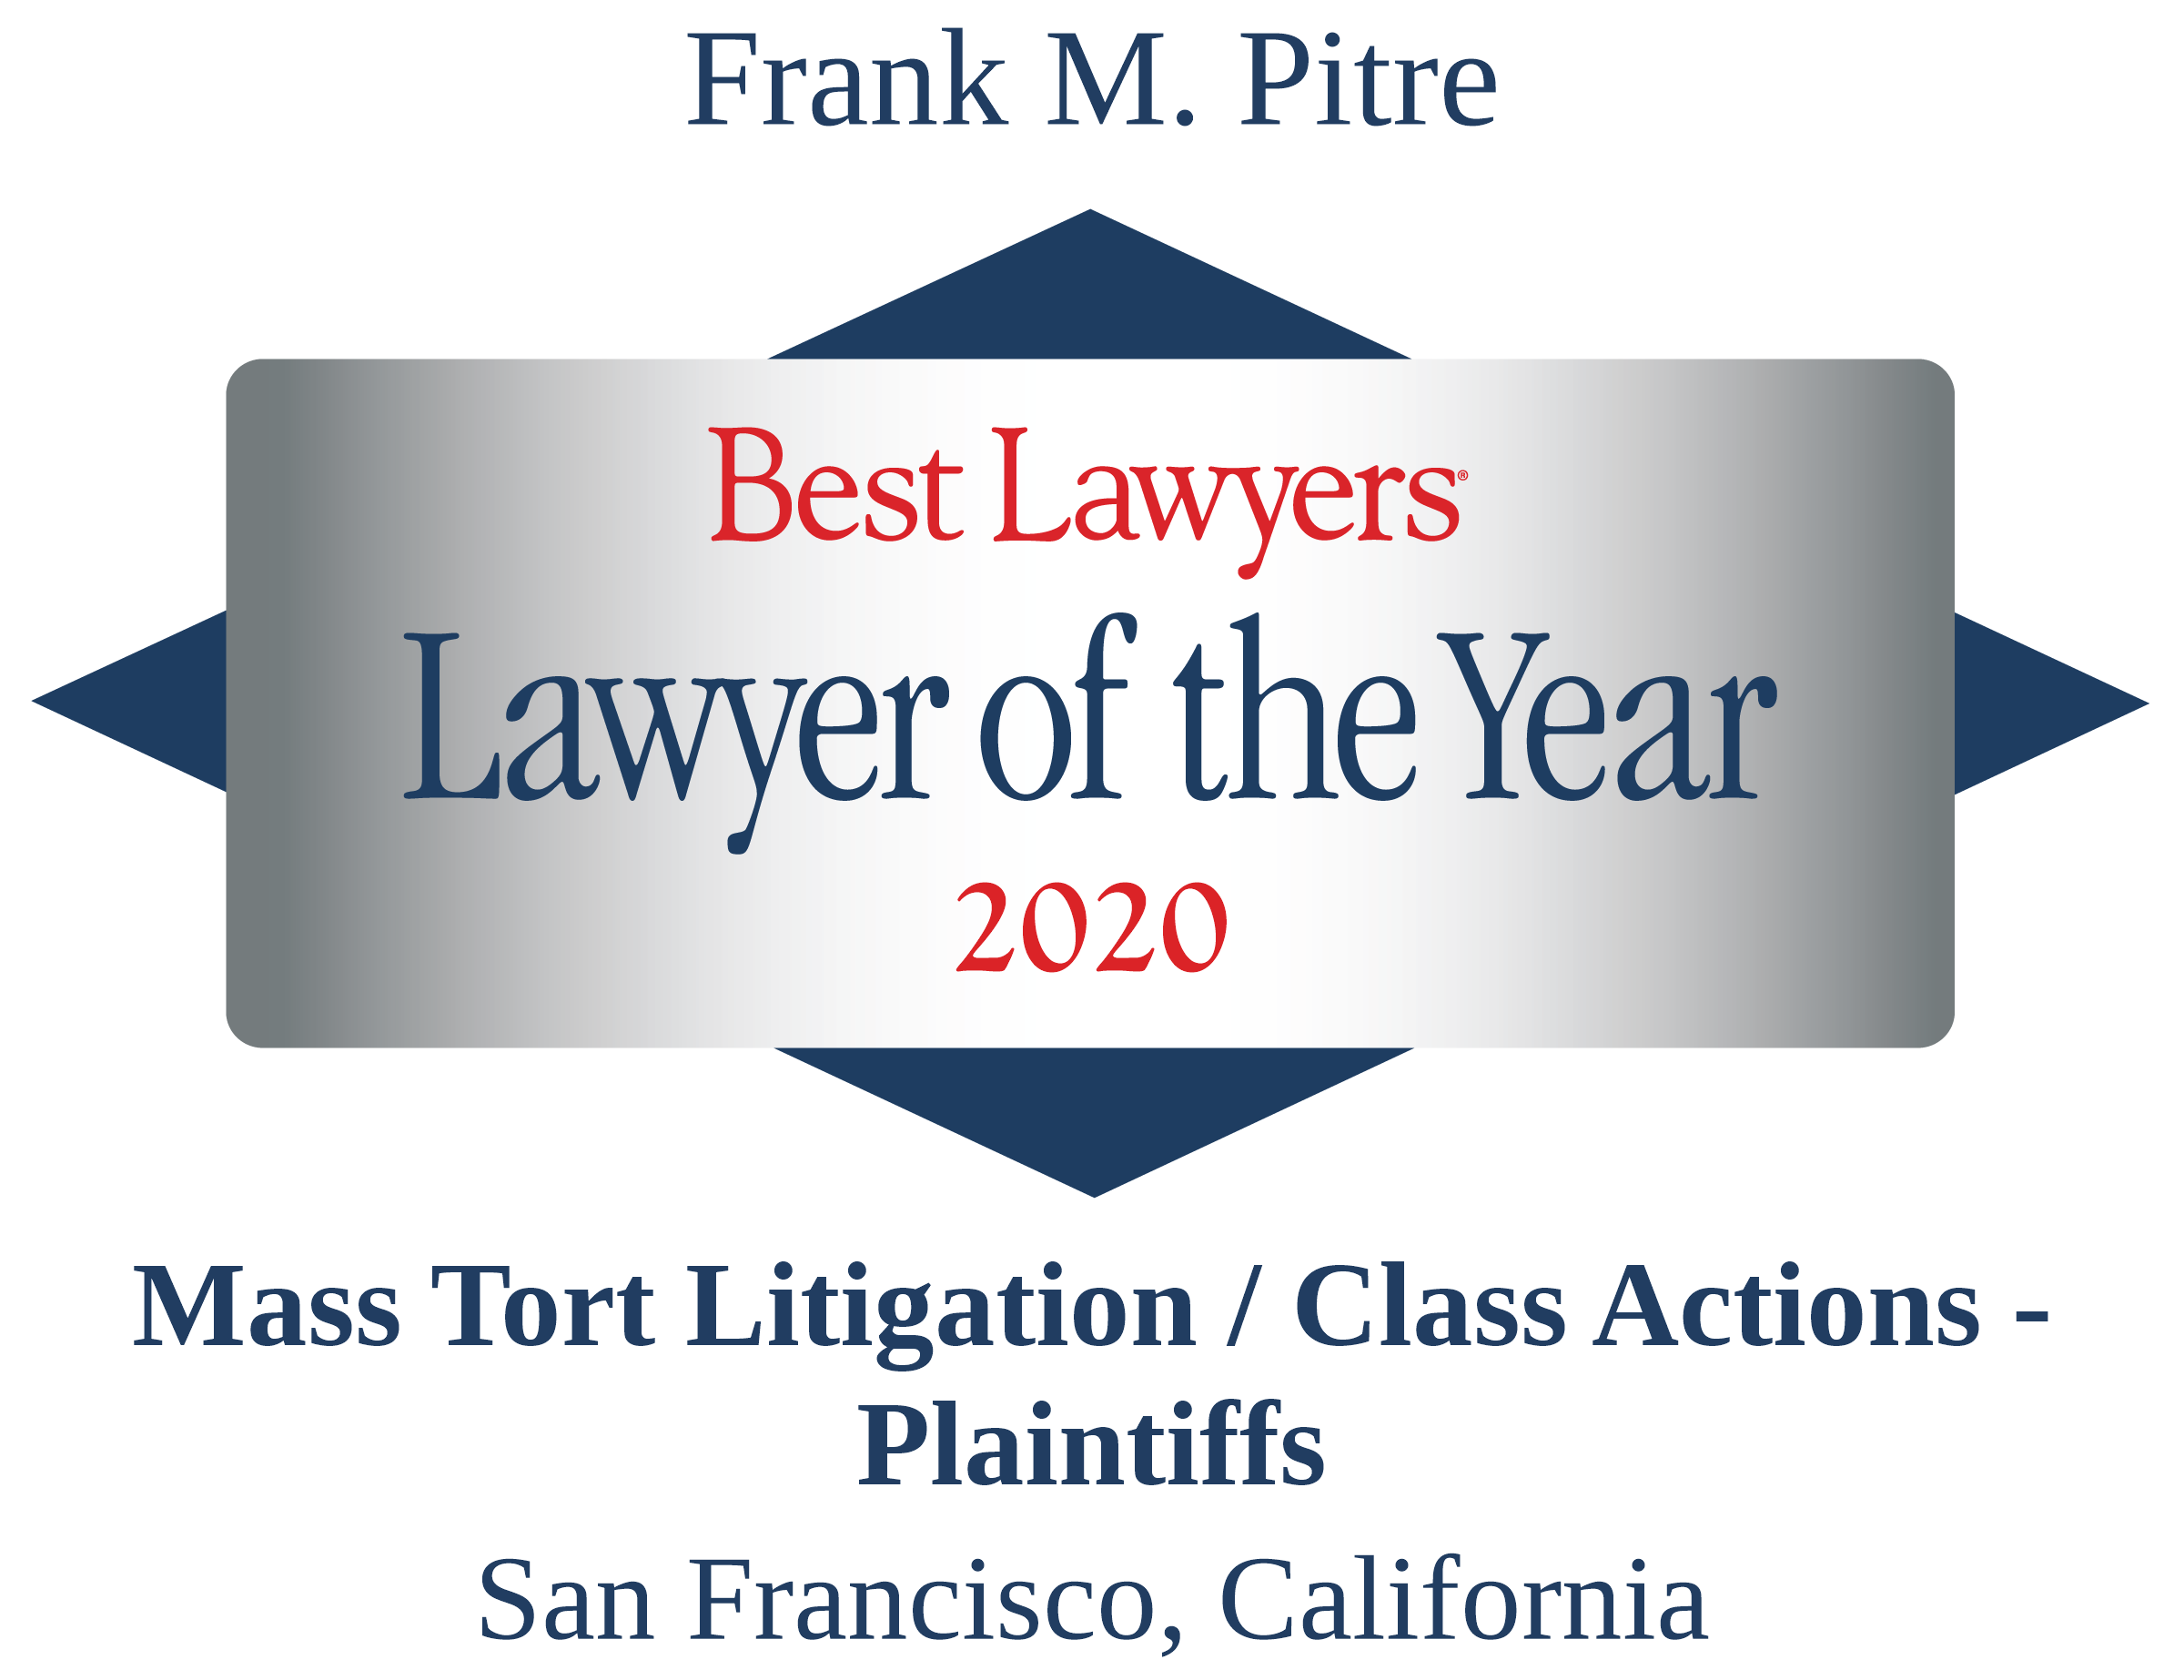 2020 Best Lawyers - Lawyer of the Year (FMP)